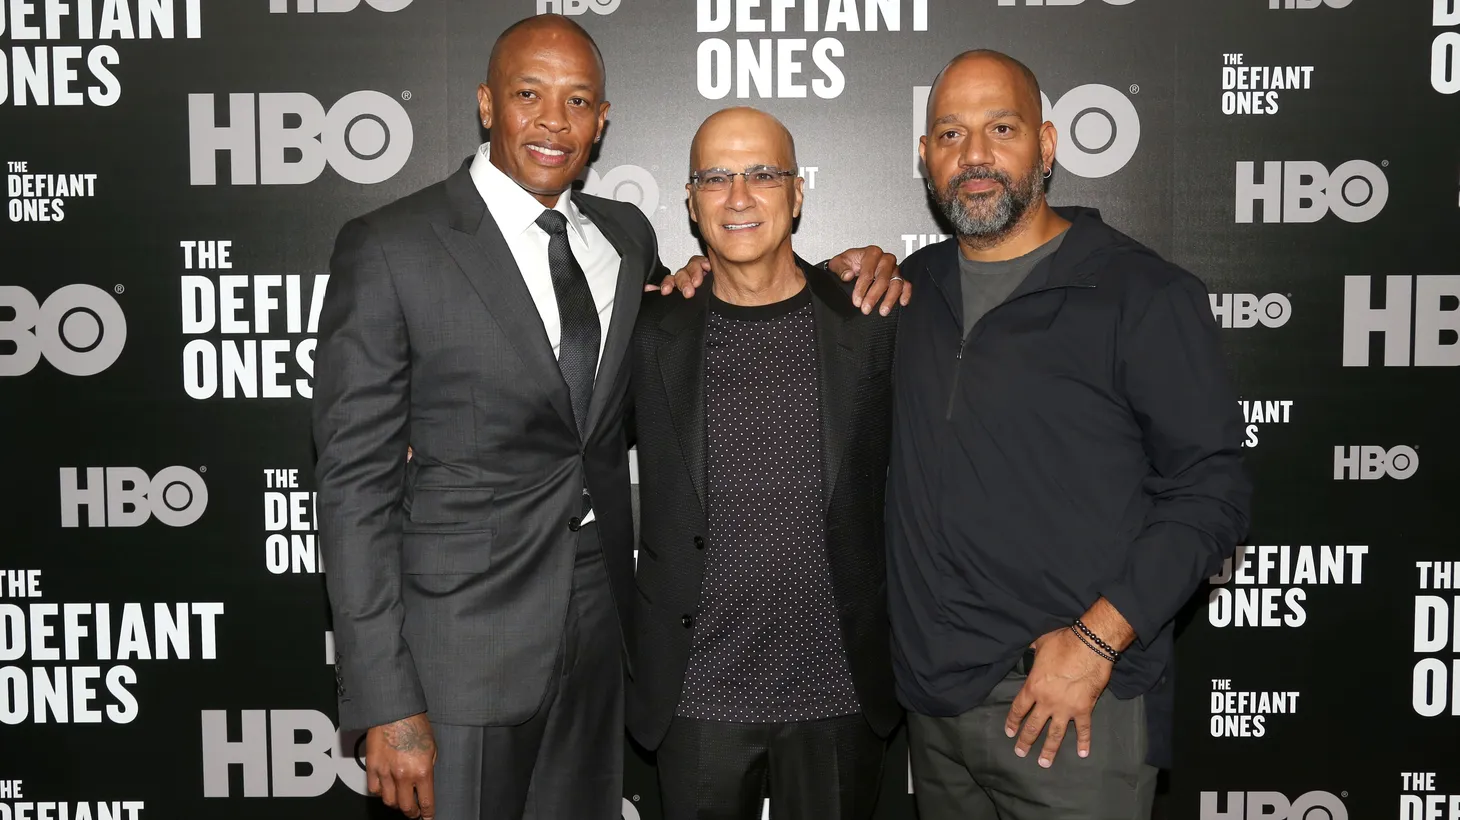 (L) Dr. Dre, Jimmy Iovine, and Allen Hughes attend the premiere of "The Defiant Ones" at the Time Warner Center in New York on June 27, 2017.